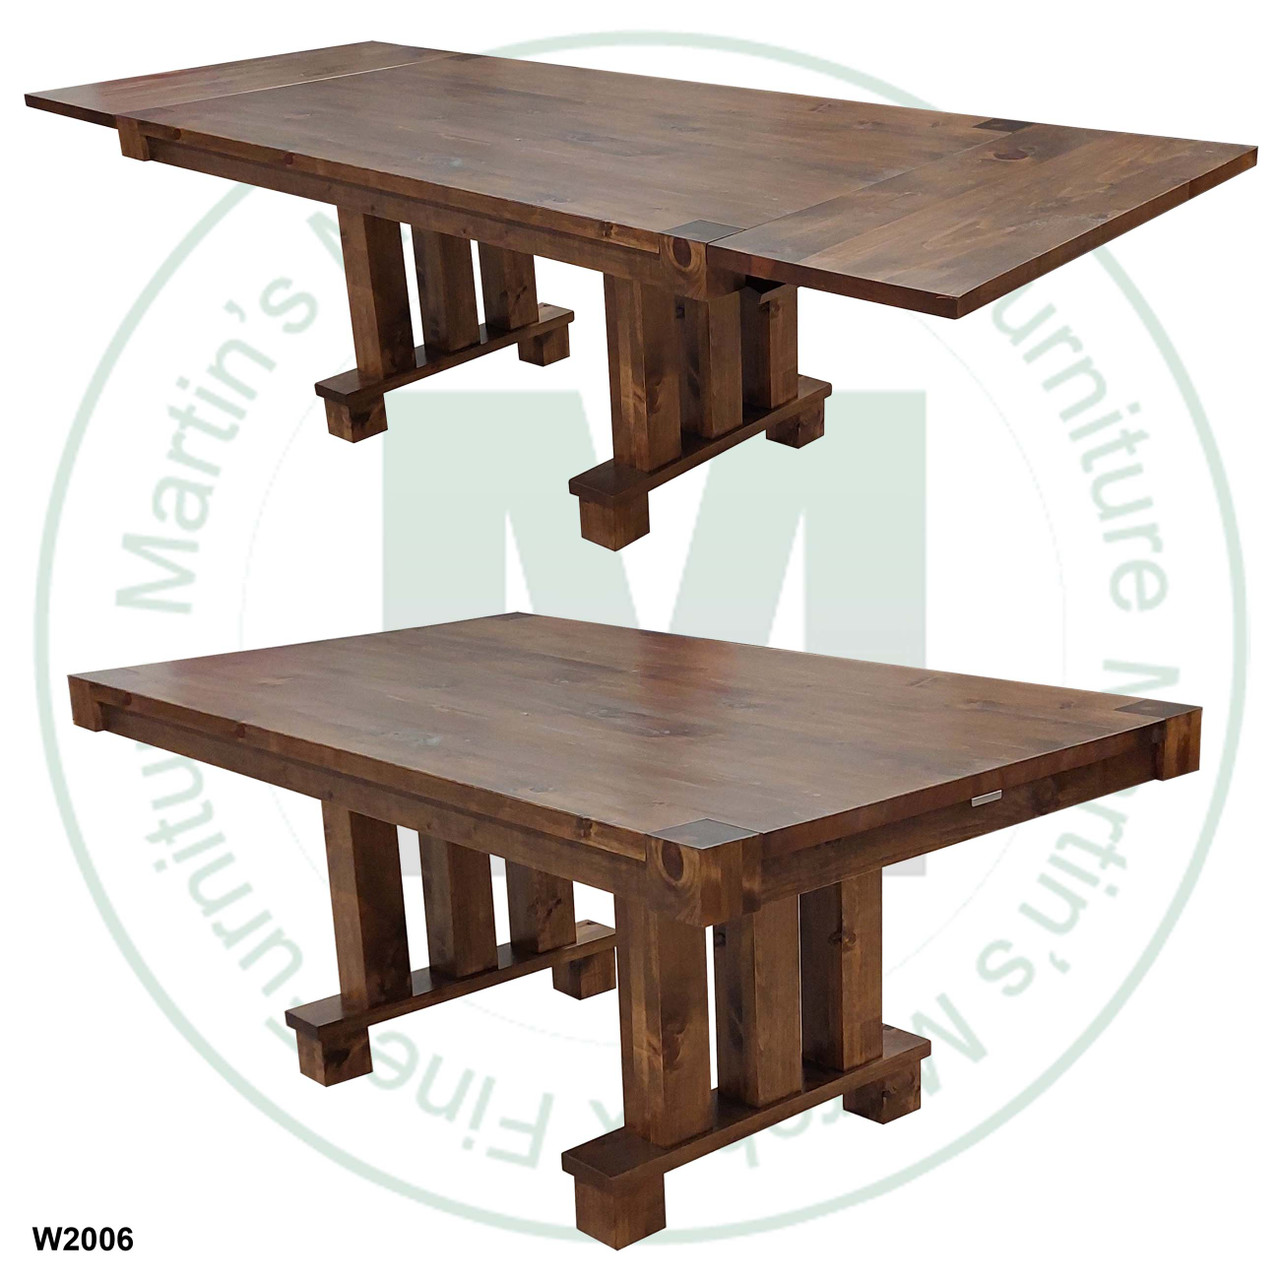 Maple Backwoods Solid Top Pedestal Table 48''D x 120''W x 30''H With 2 - 18'' Leaves